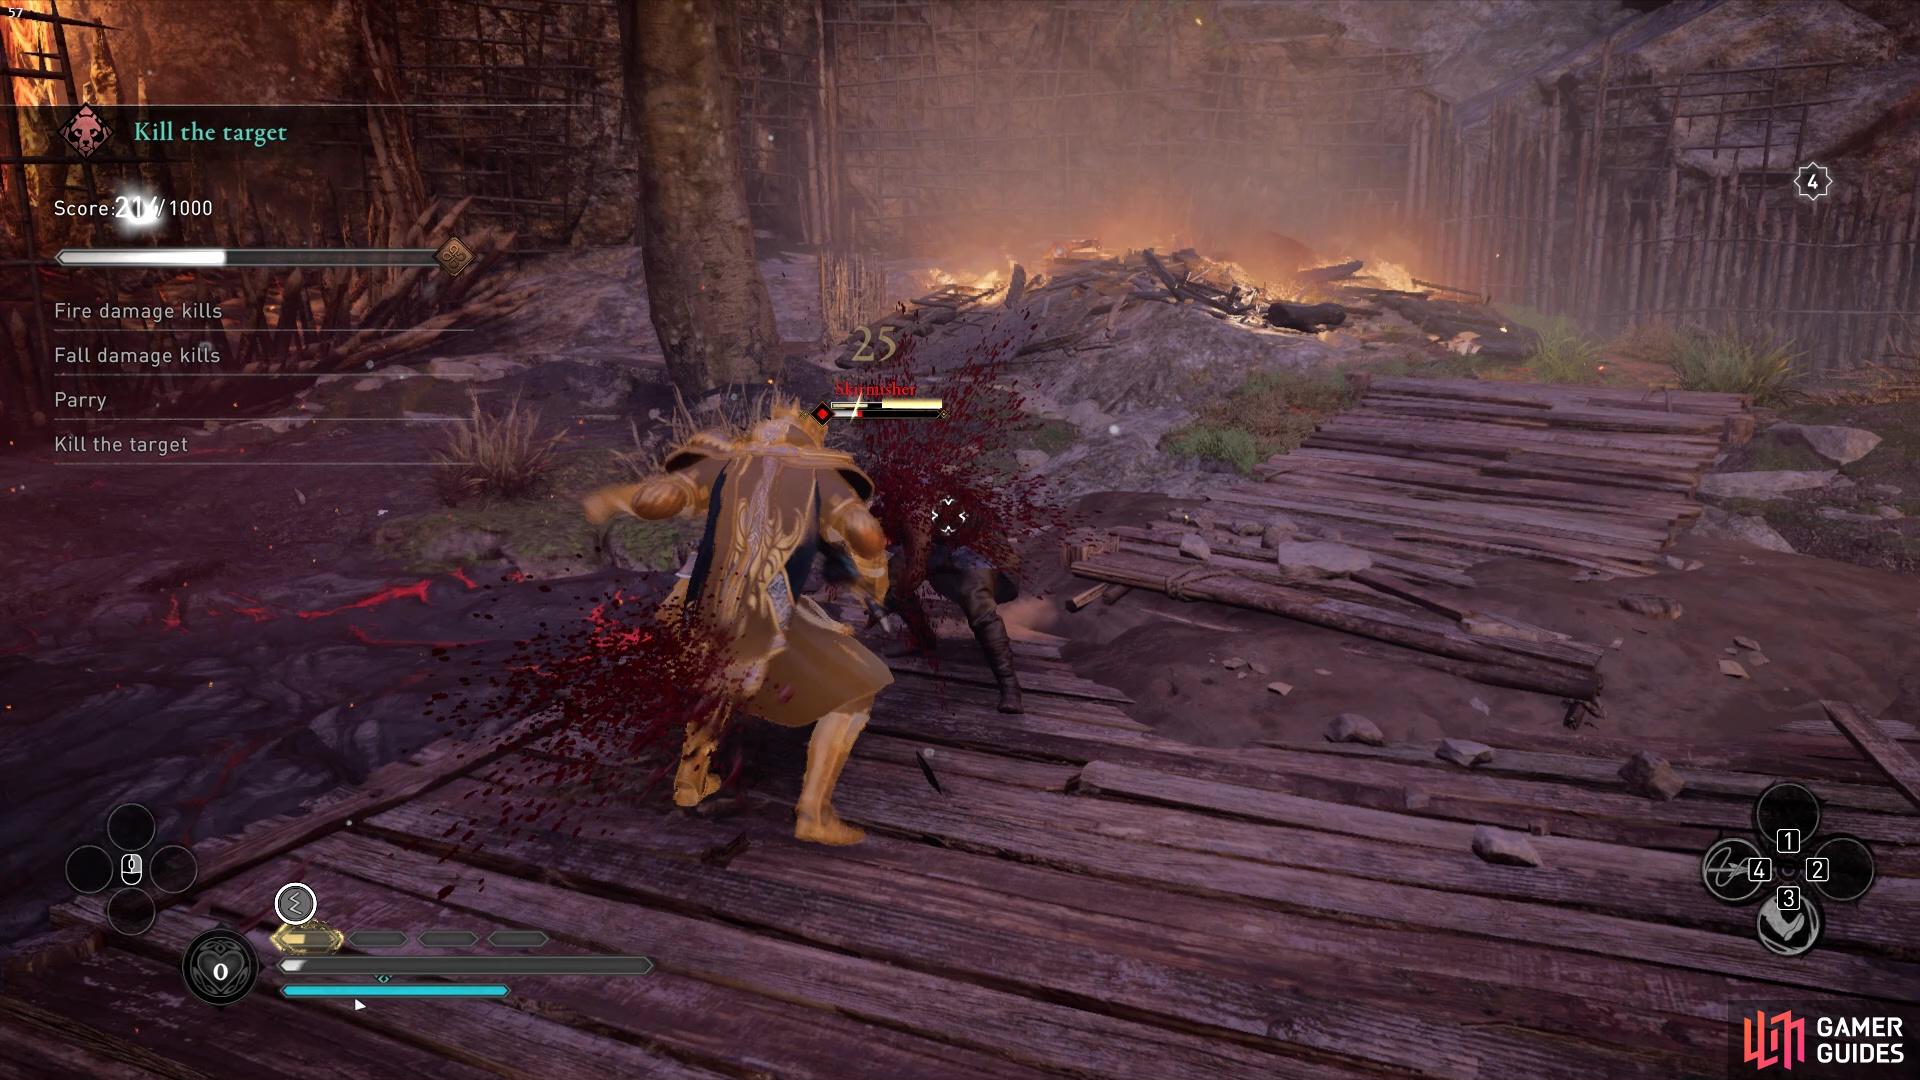 Youll also need to parry some enemies to earn points towards the parry objective.